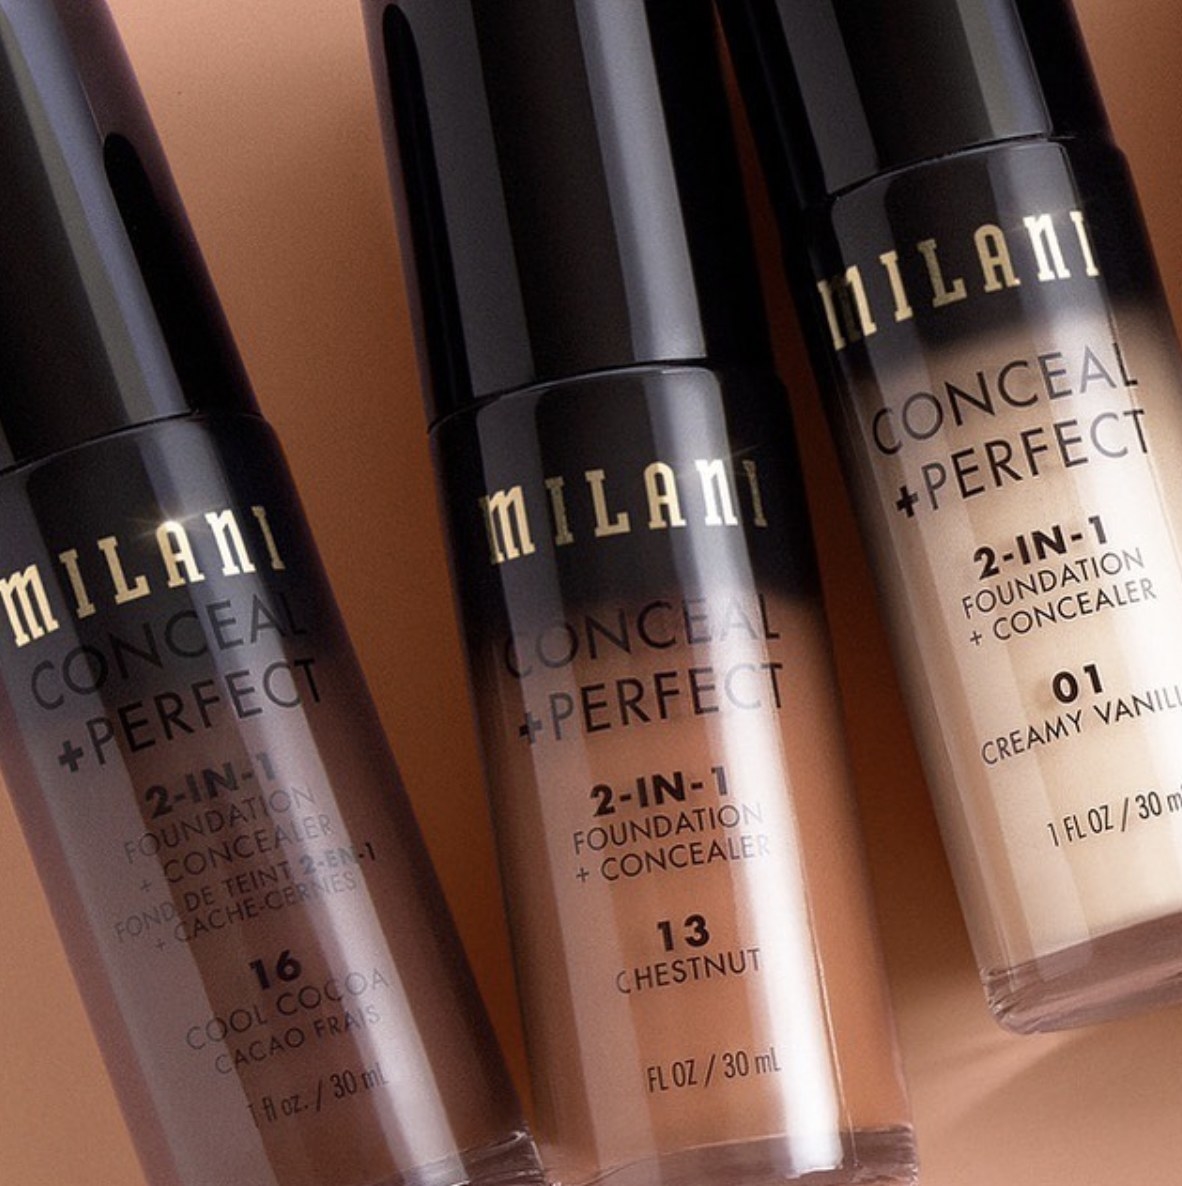 A set of three bottles of foundation and concealer